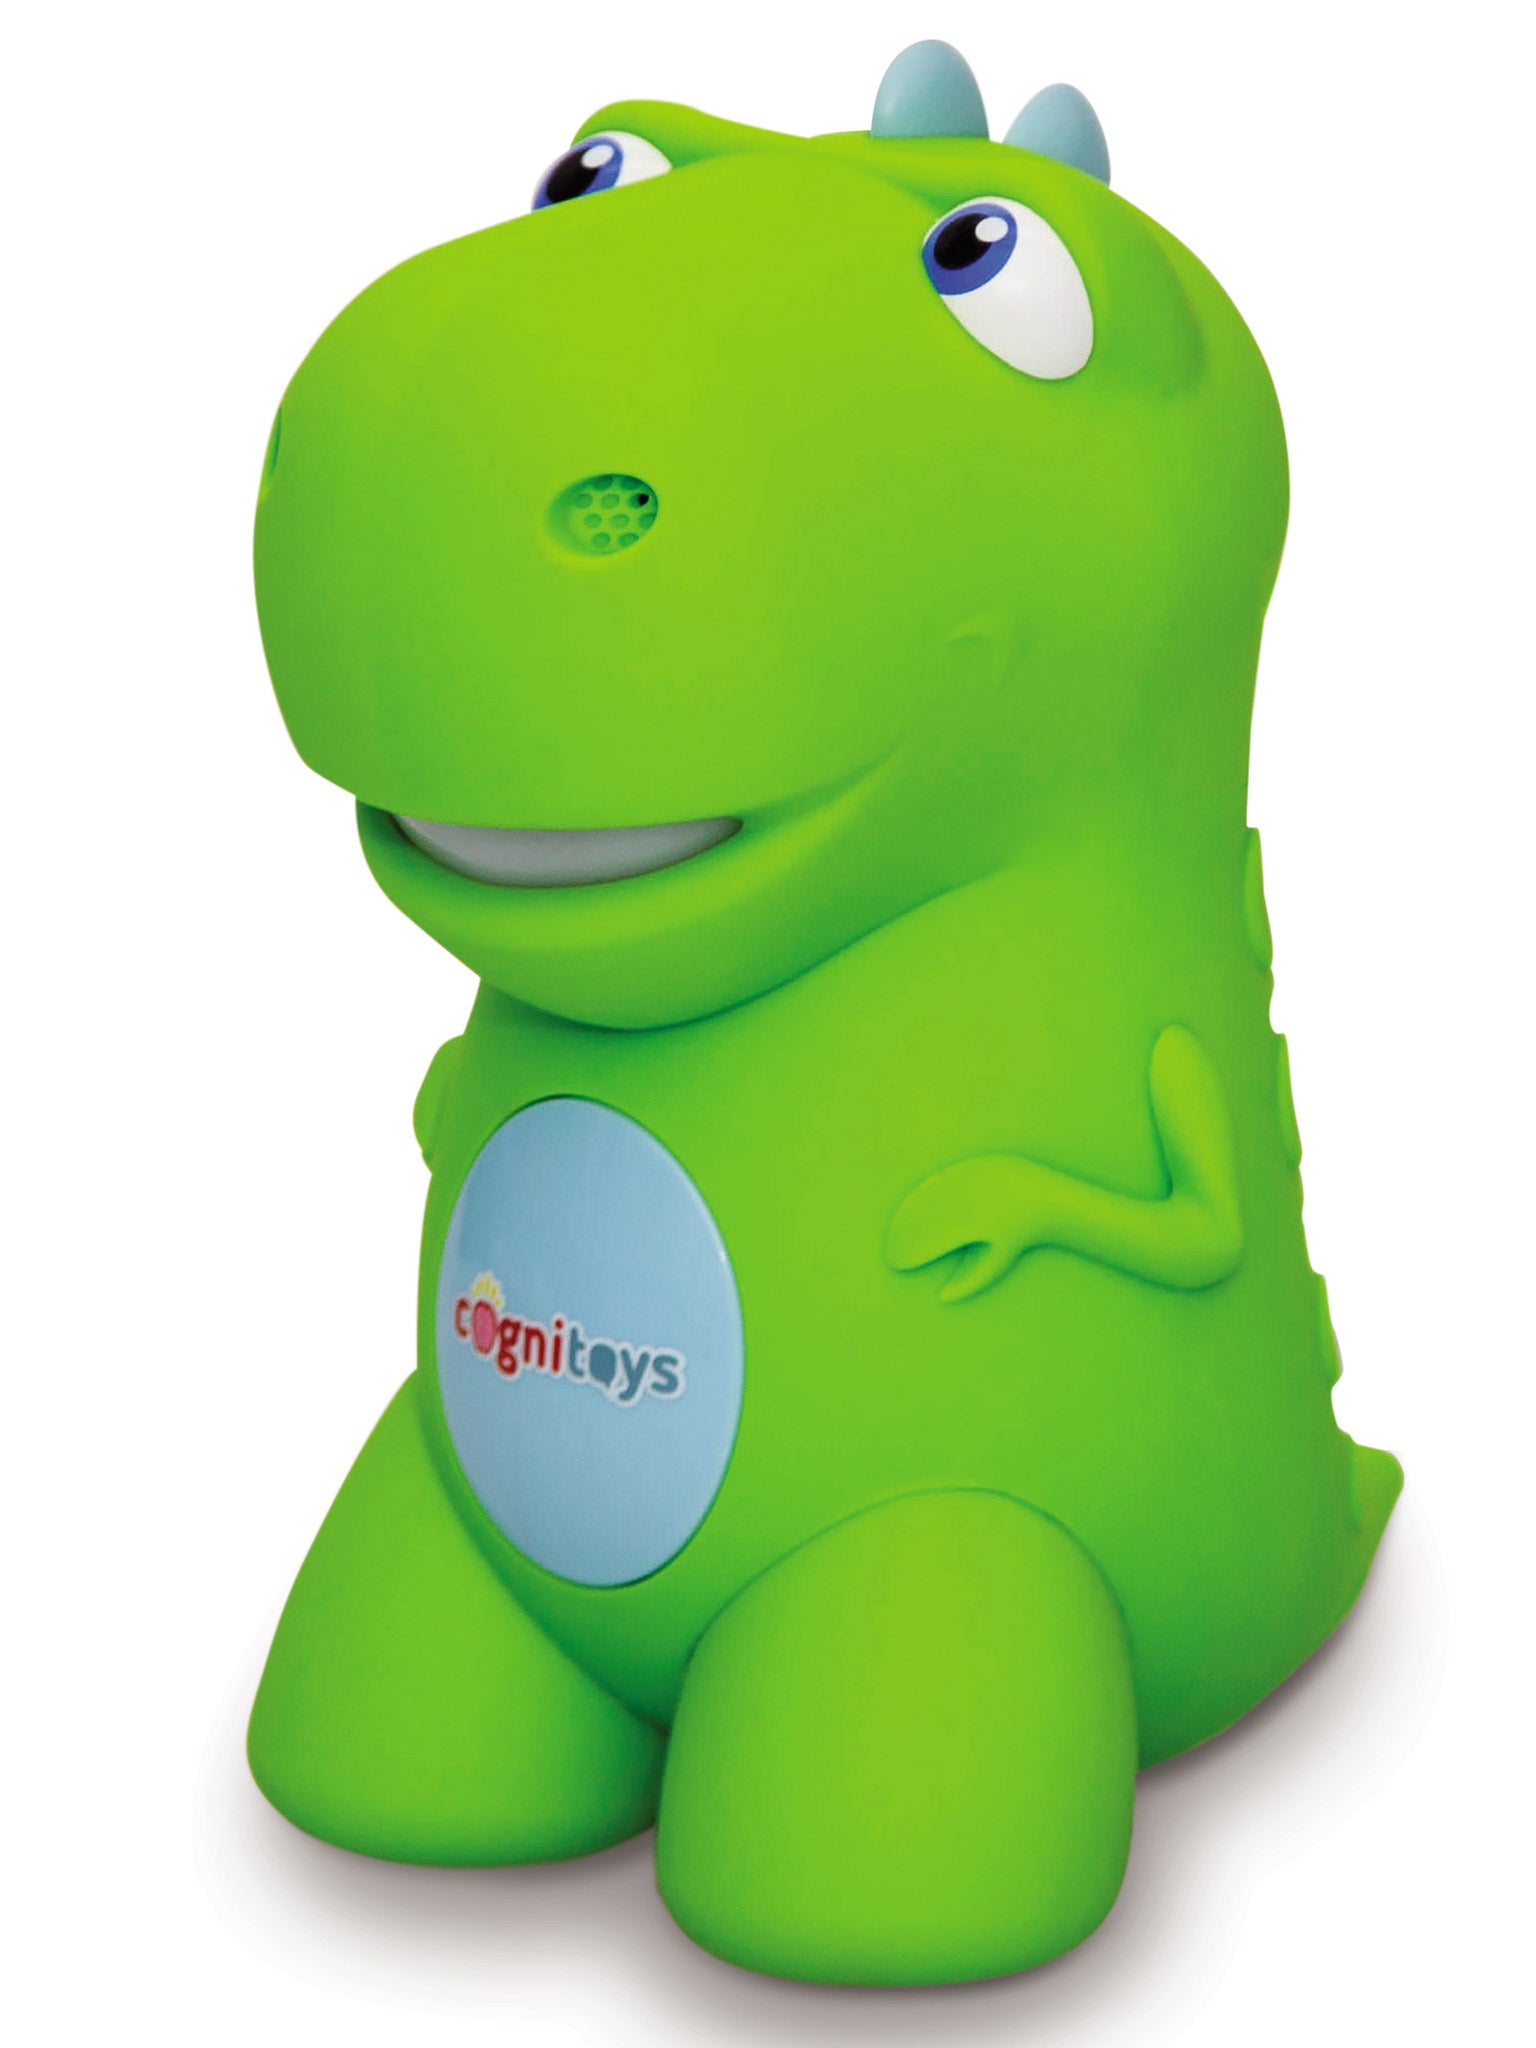 CogniToys' Green Dino is powered by IBM's Watson